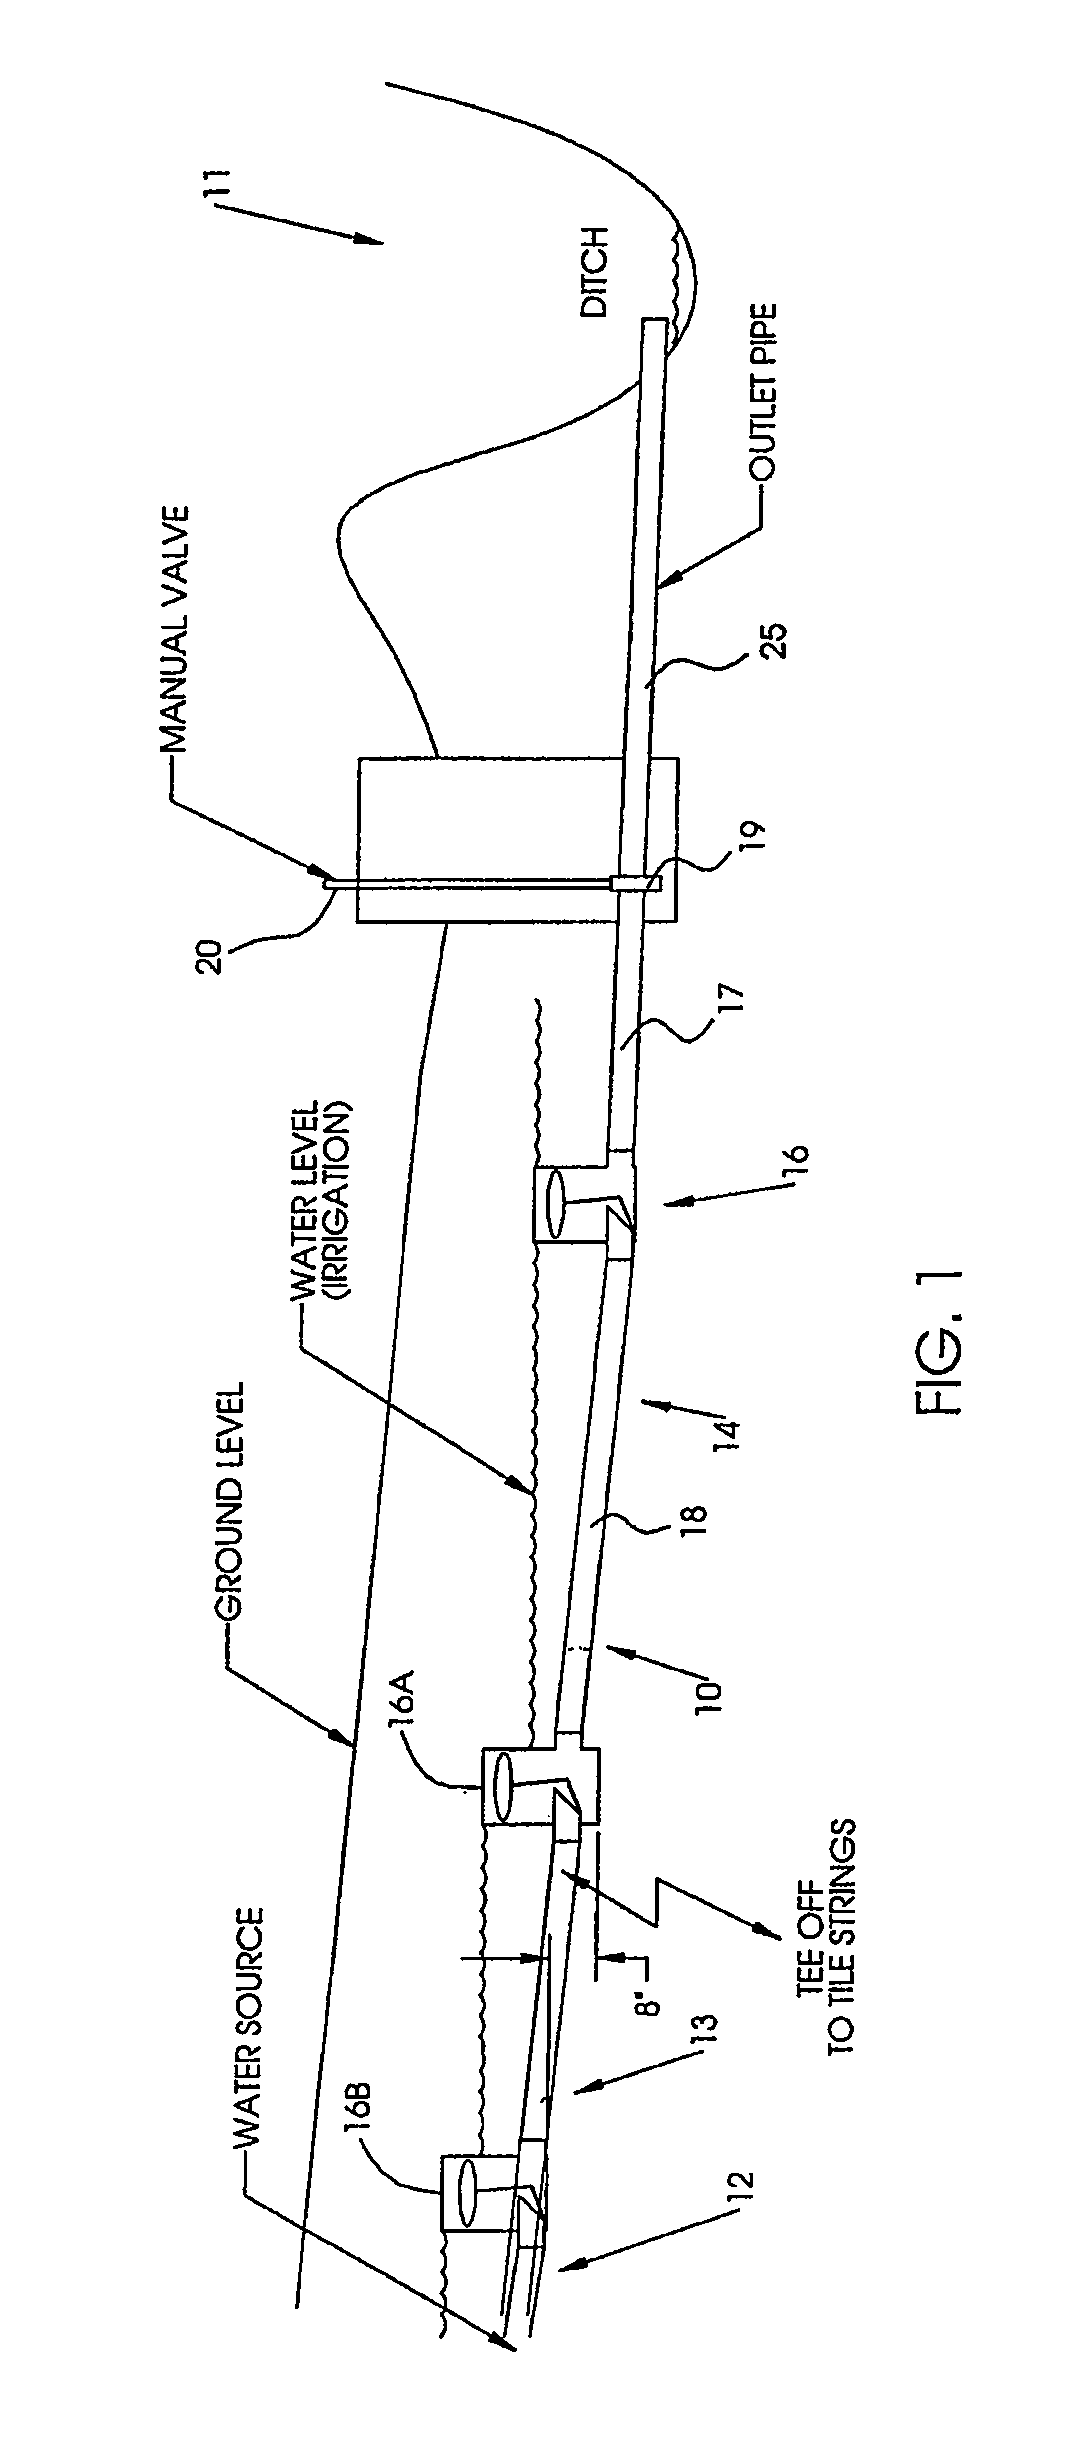 Method and apparatus for controlling drainage and irrigation of fields